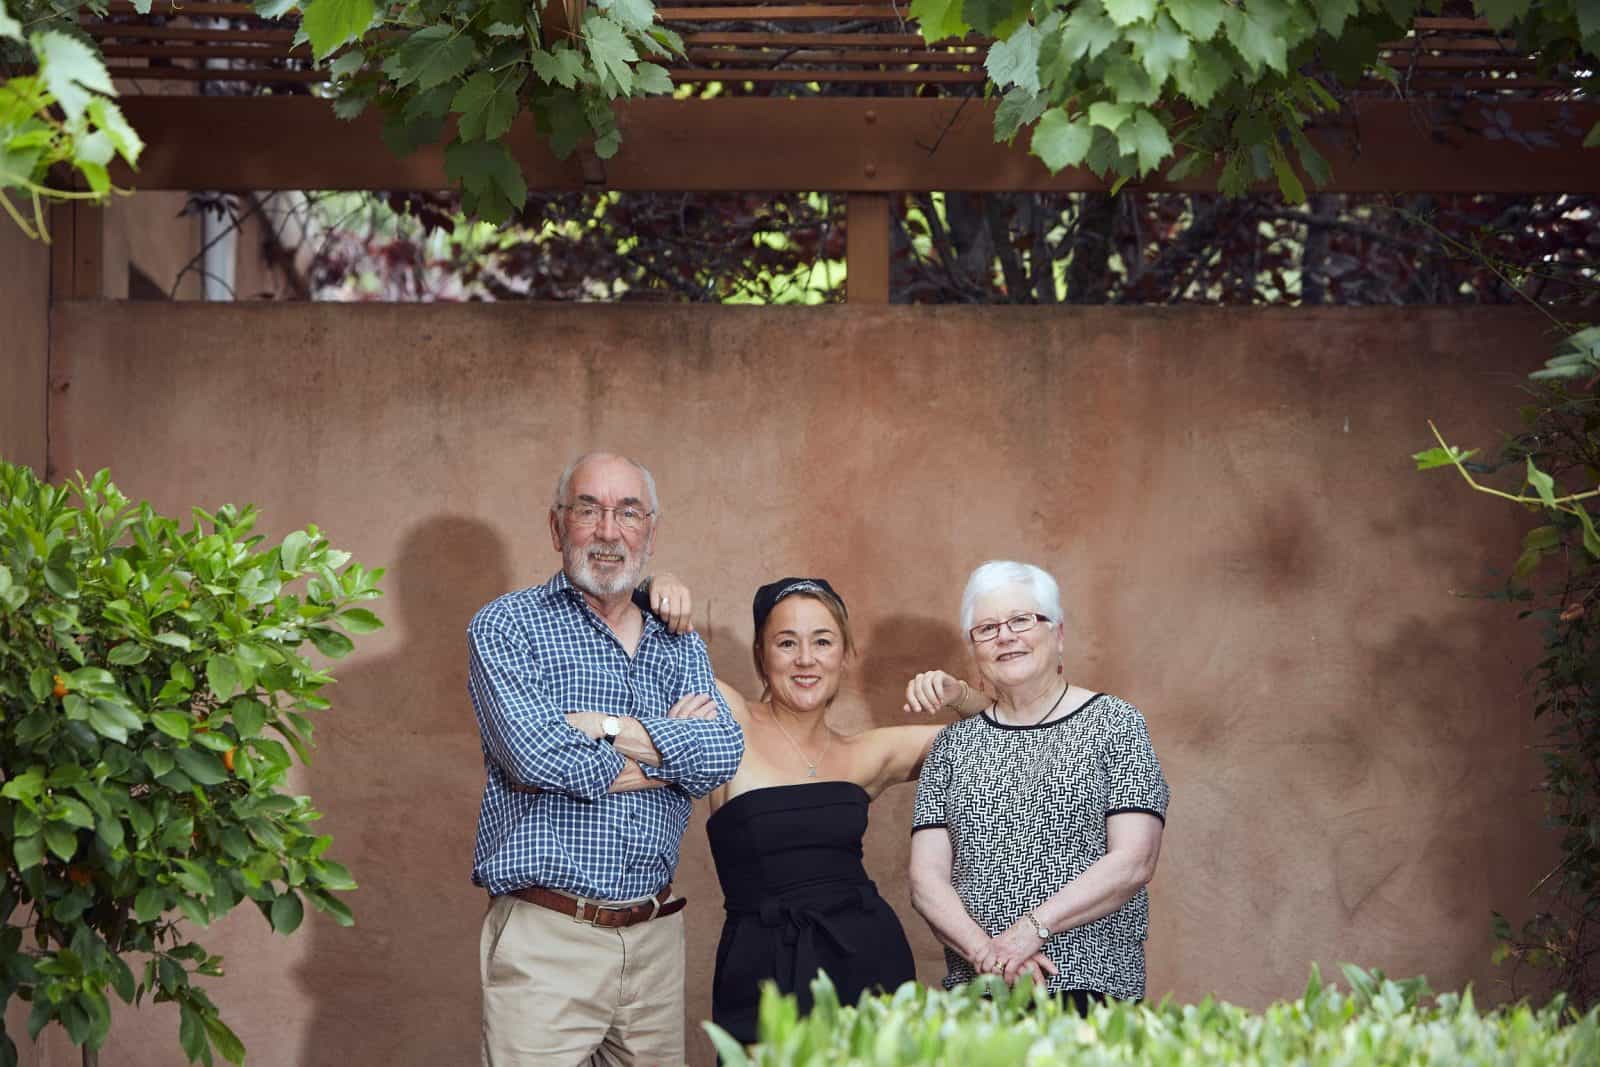 The Moody Family - Winemaker Rob, Matriarch Heather & Daughter Lucy